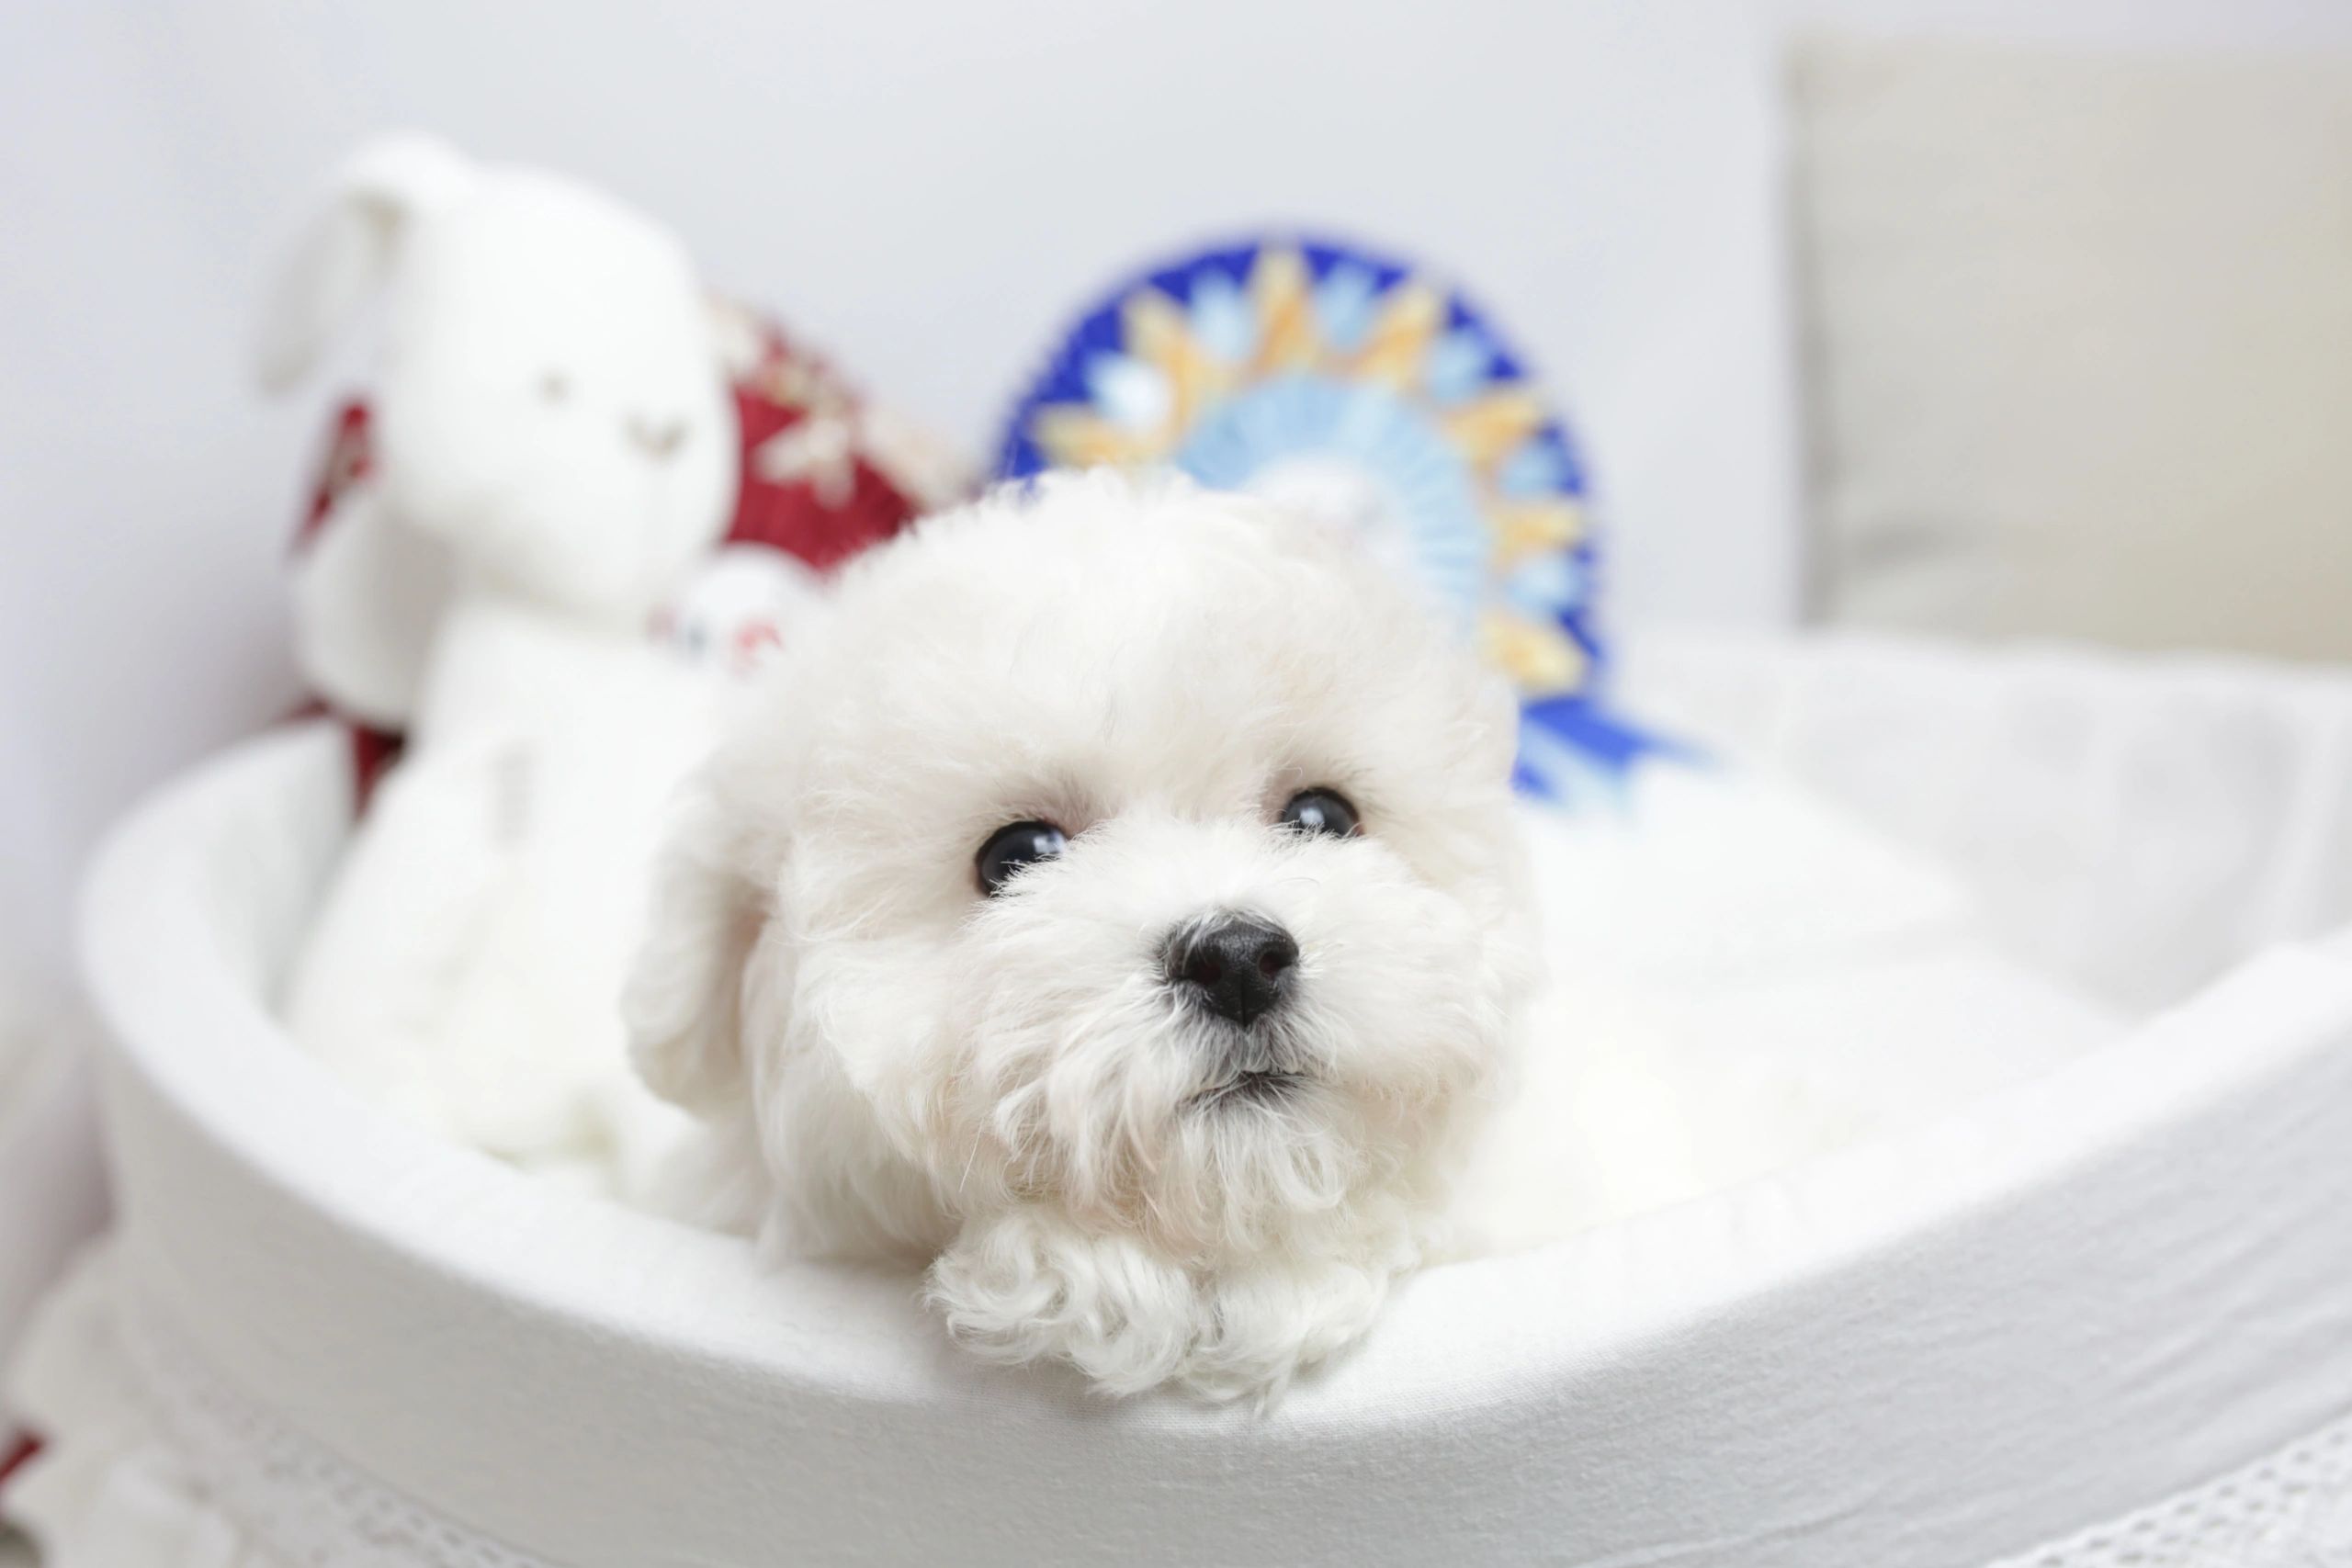 Uzzuzzu My Pet – one of the most popular Korean brand coming to